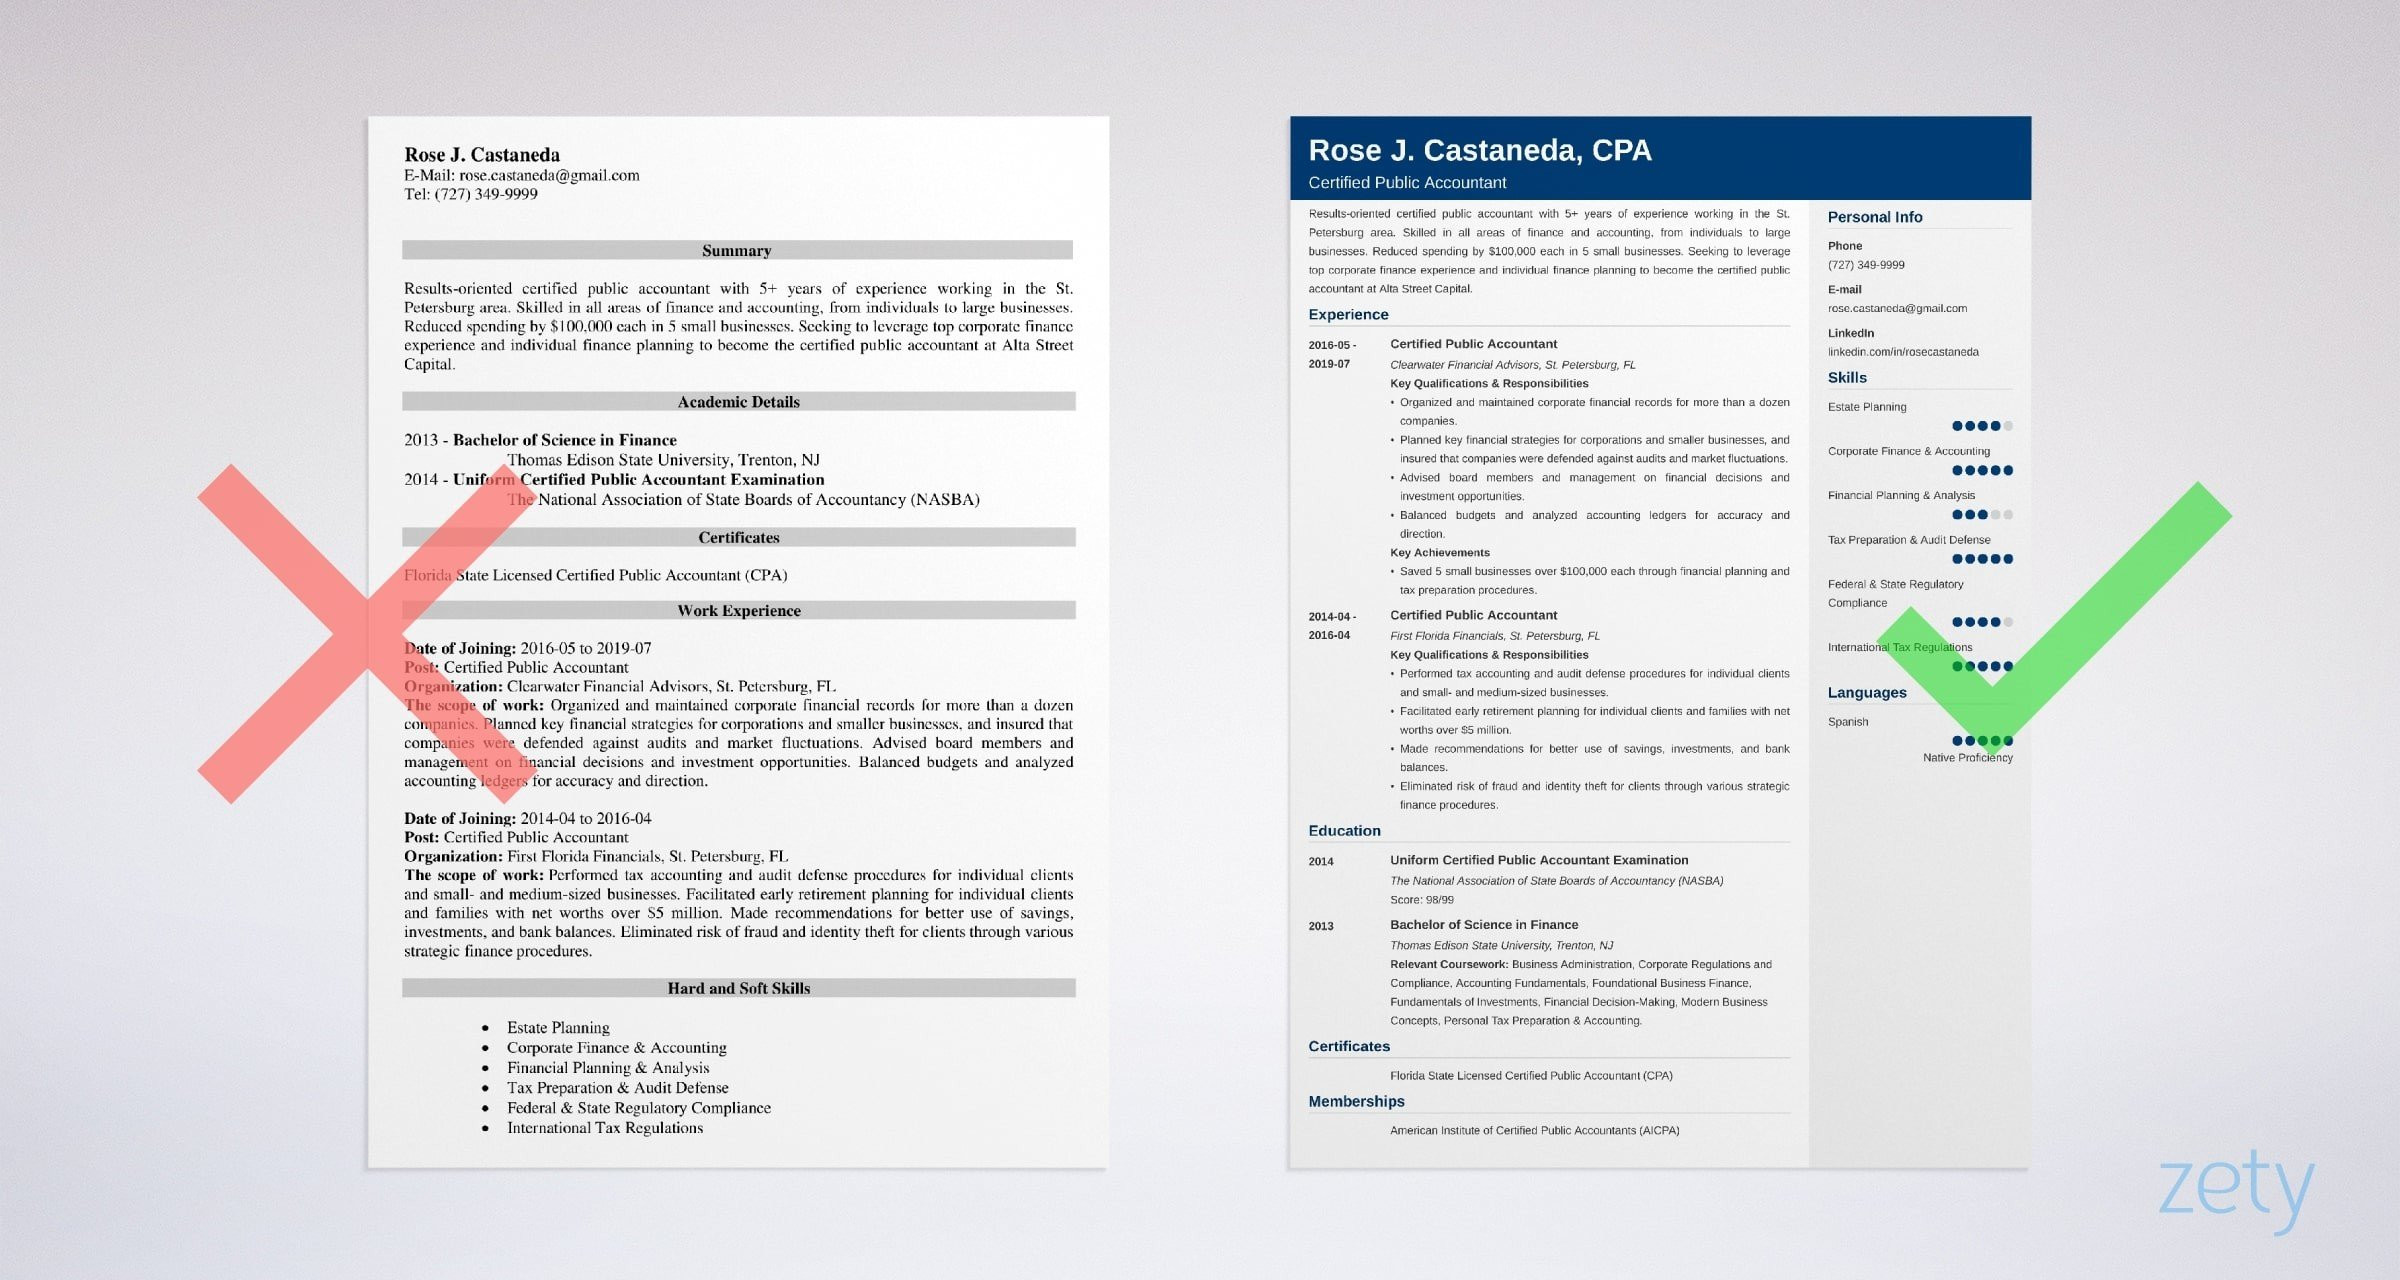 Sample Resume for Cpa Board Passer Certified Public Accountant (cpa) Resume Sample & Guide